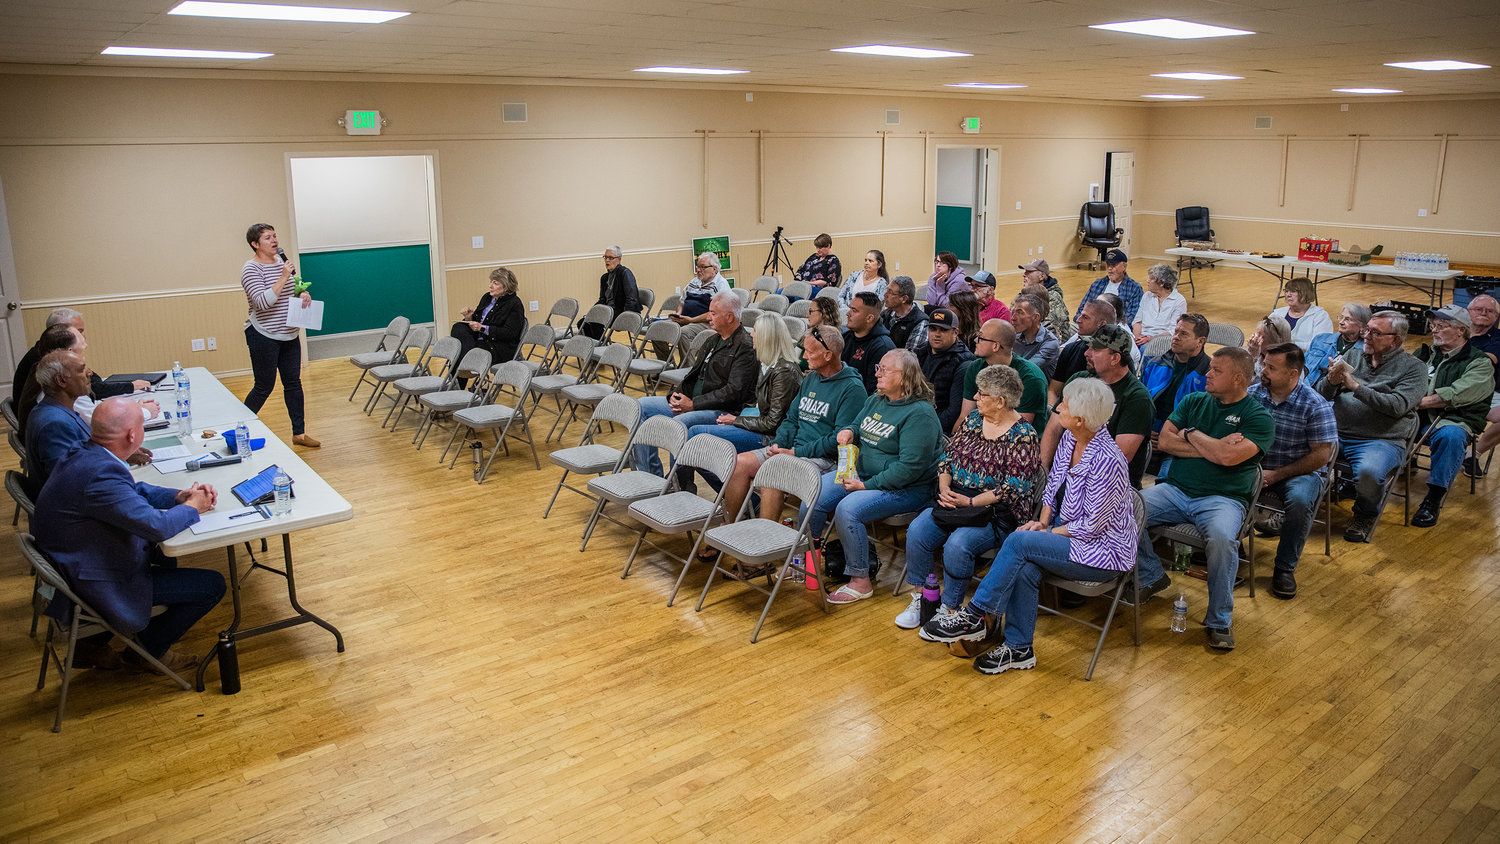 Mindy Brooks introduces candidates for attendees at Packwood Community Hall on Thursday.